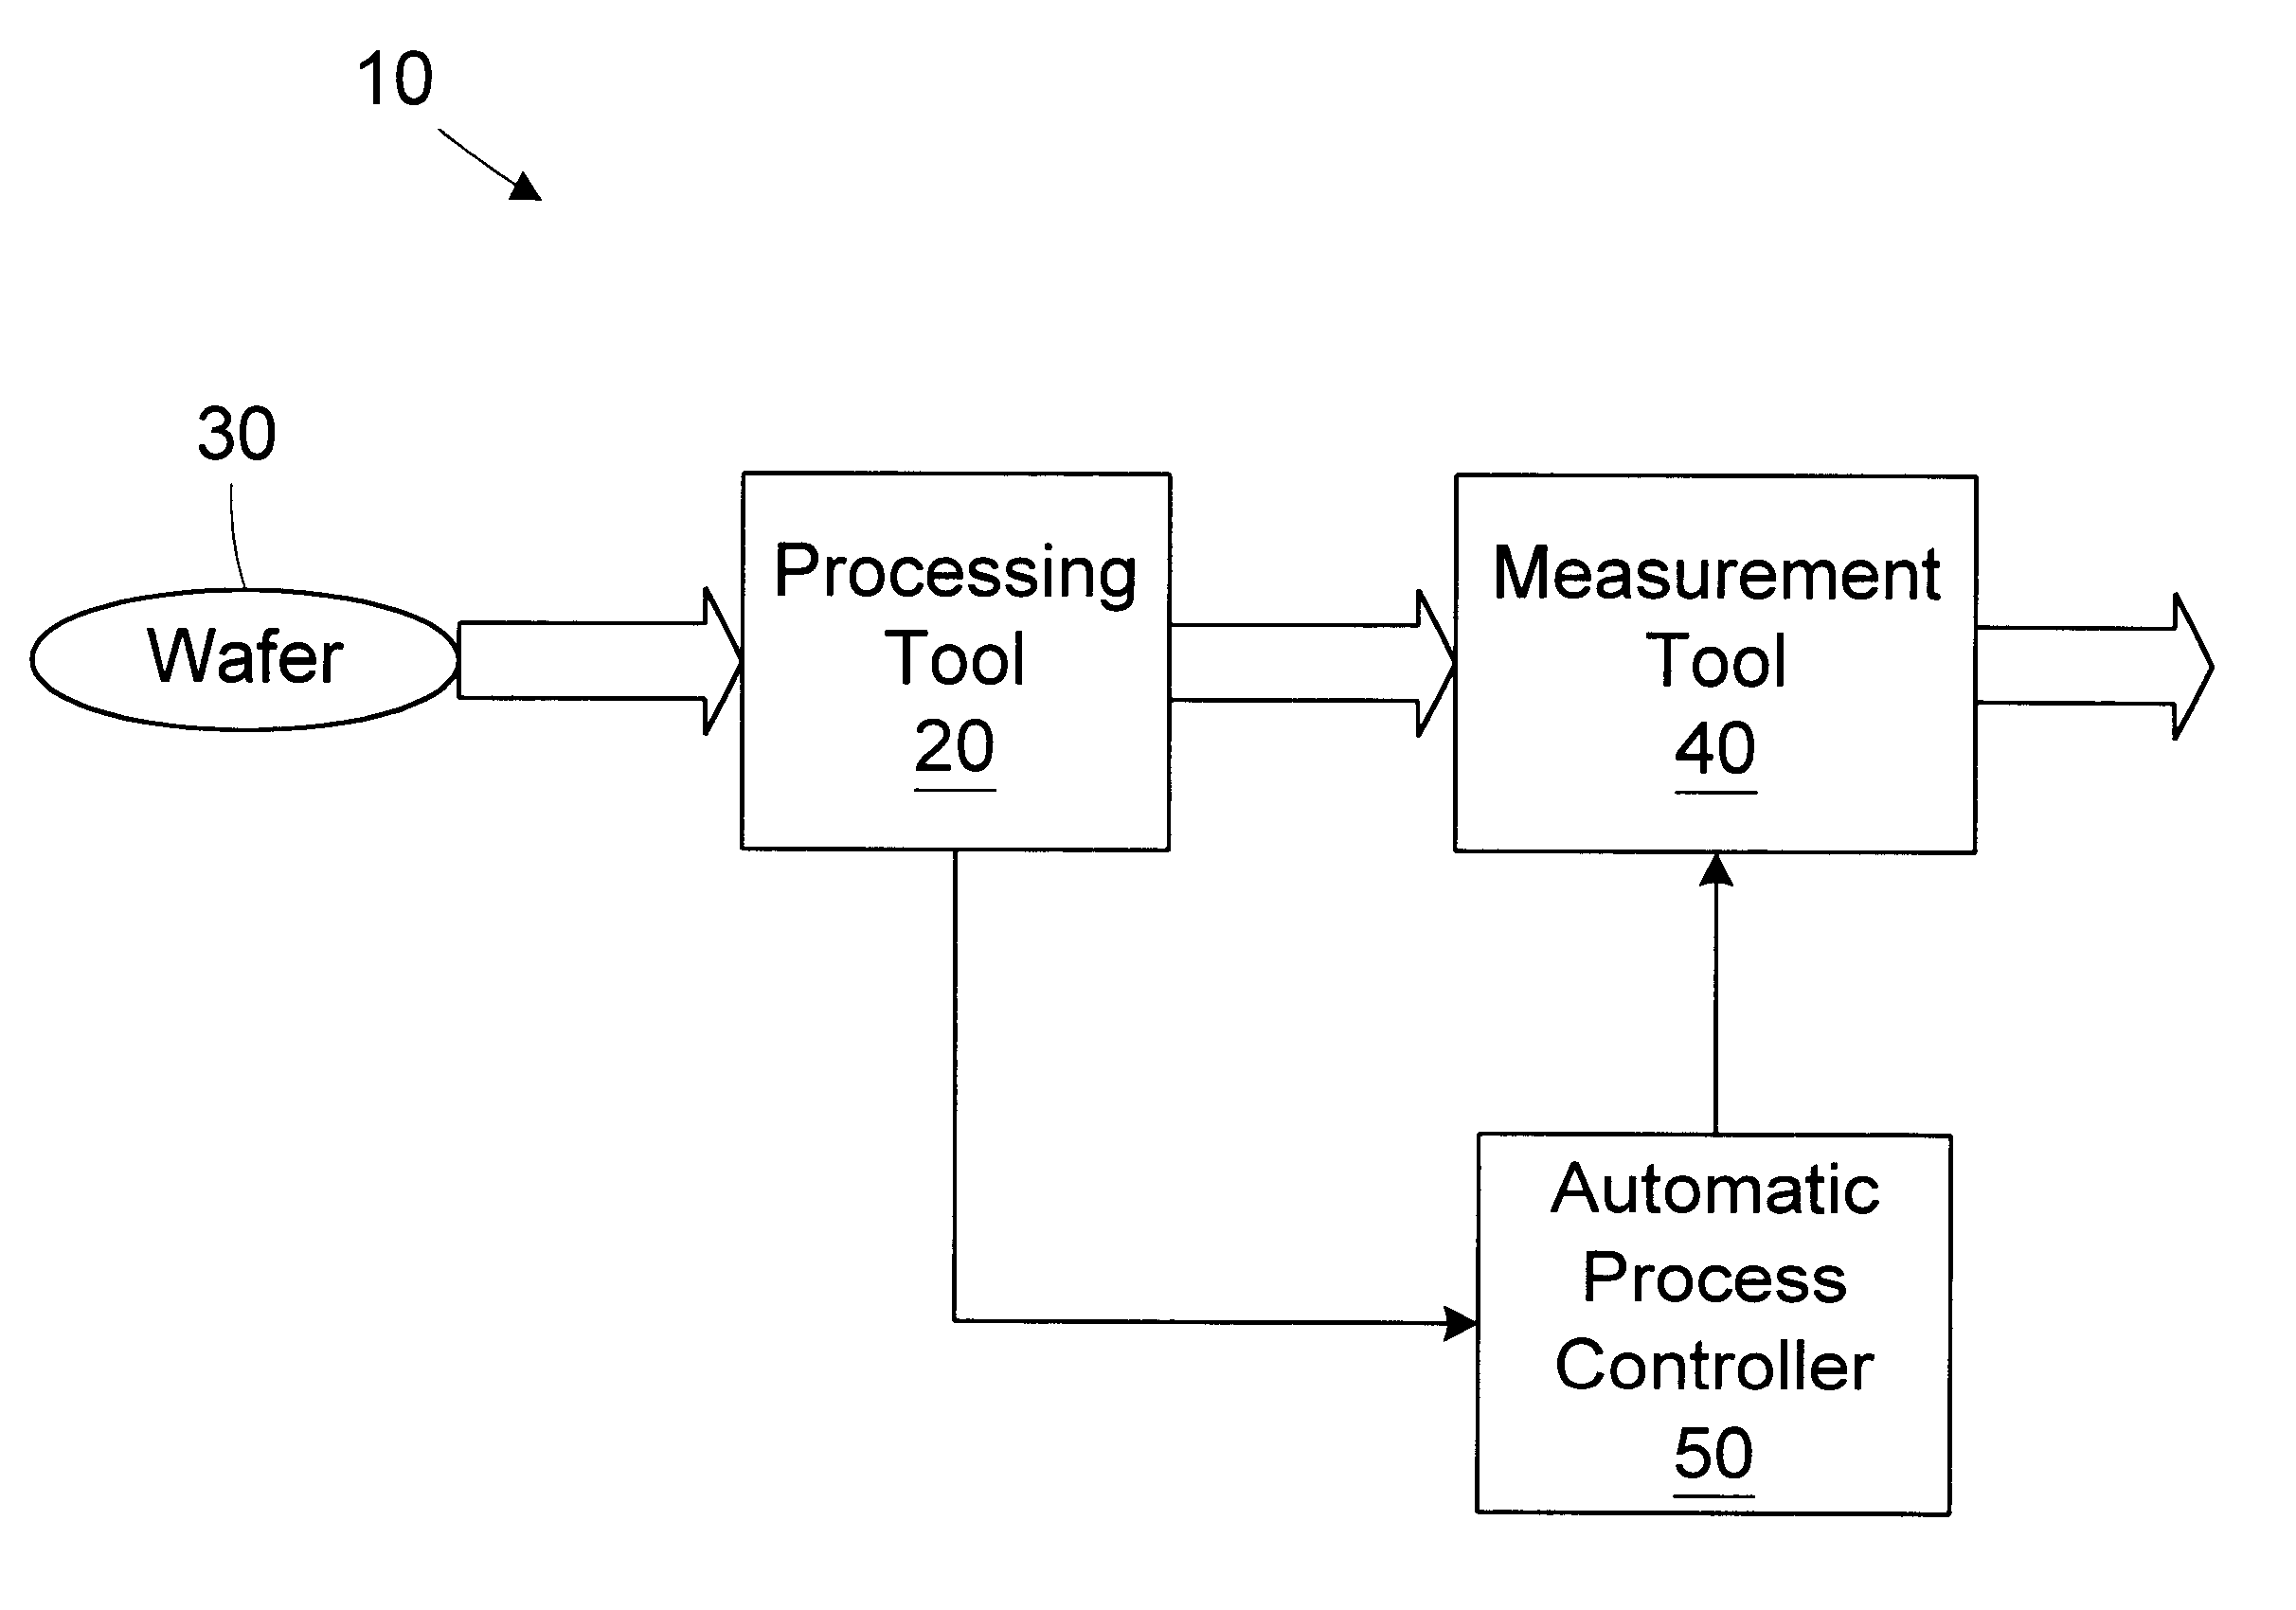 Method and apparatus for determining measurement frequency based on hardware age and usage